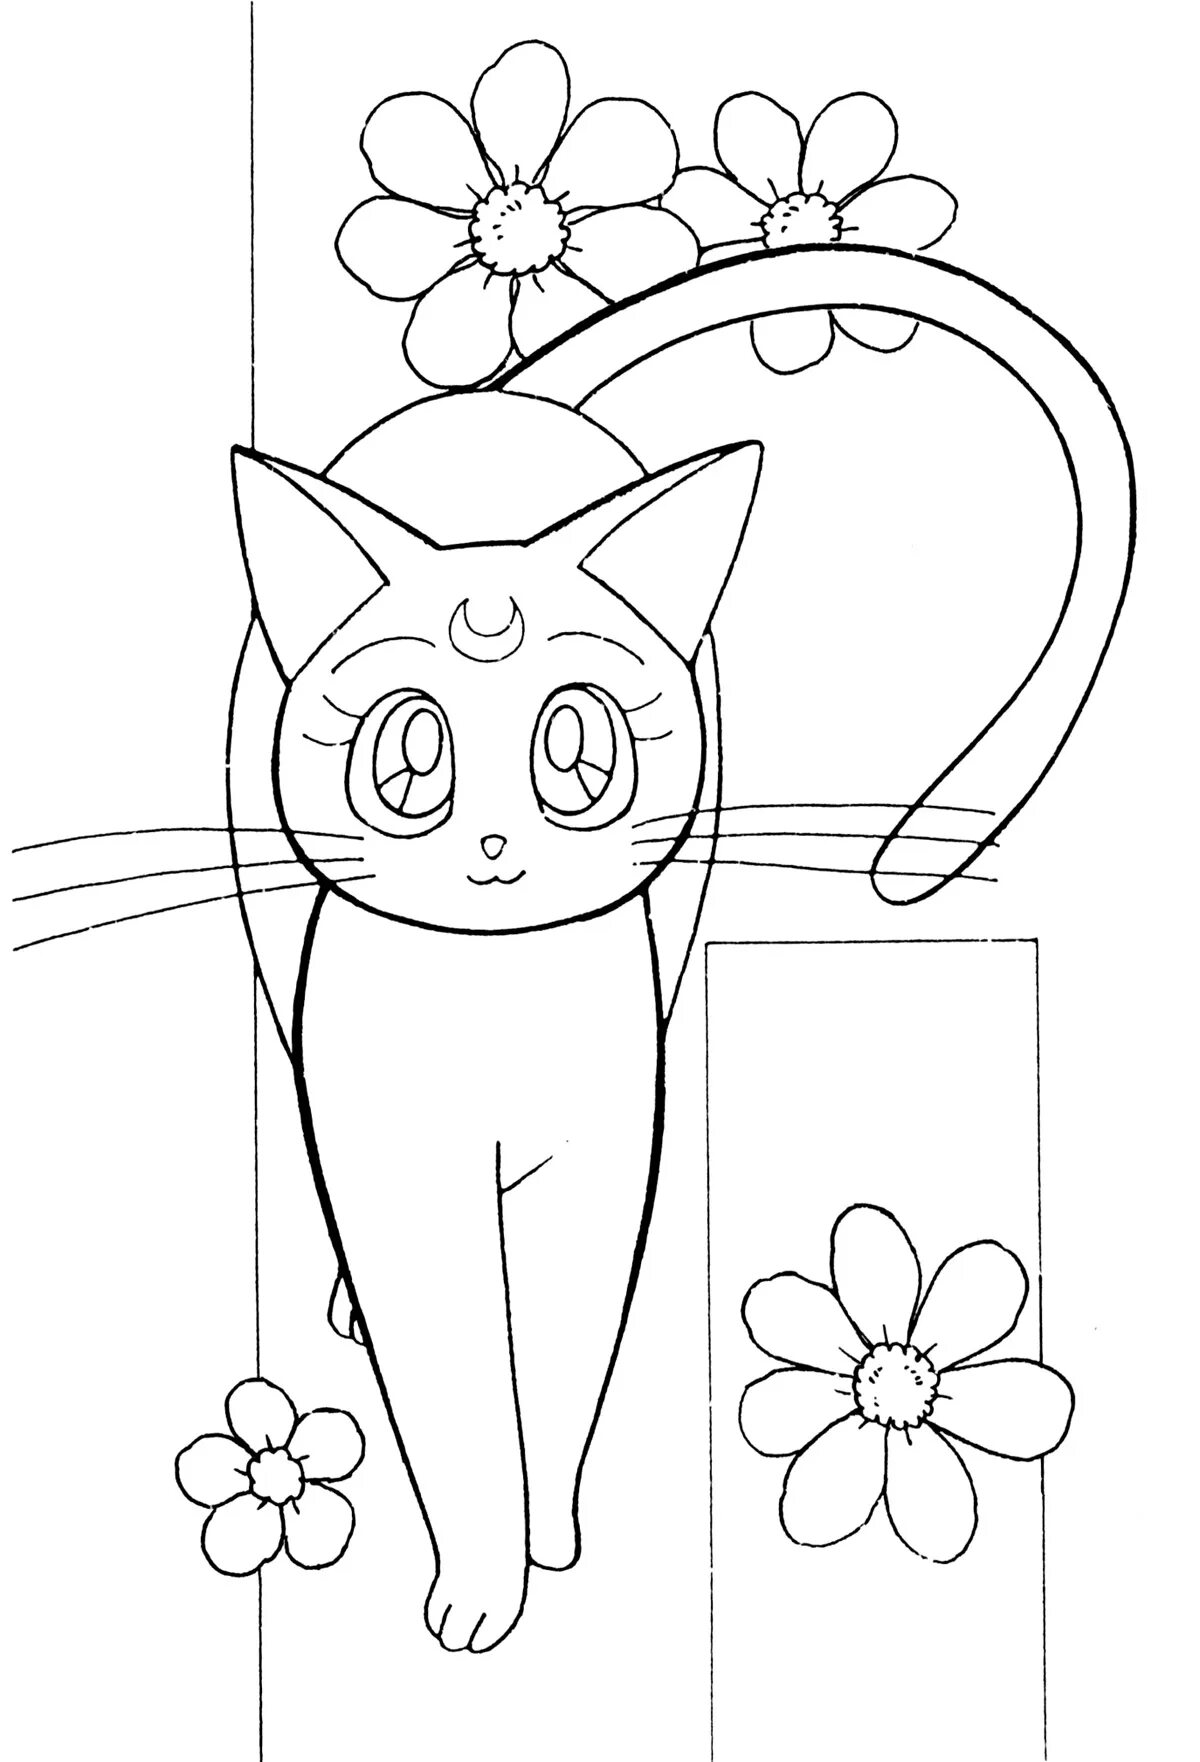 Exalted moon cat coloring page